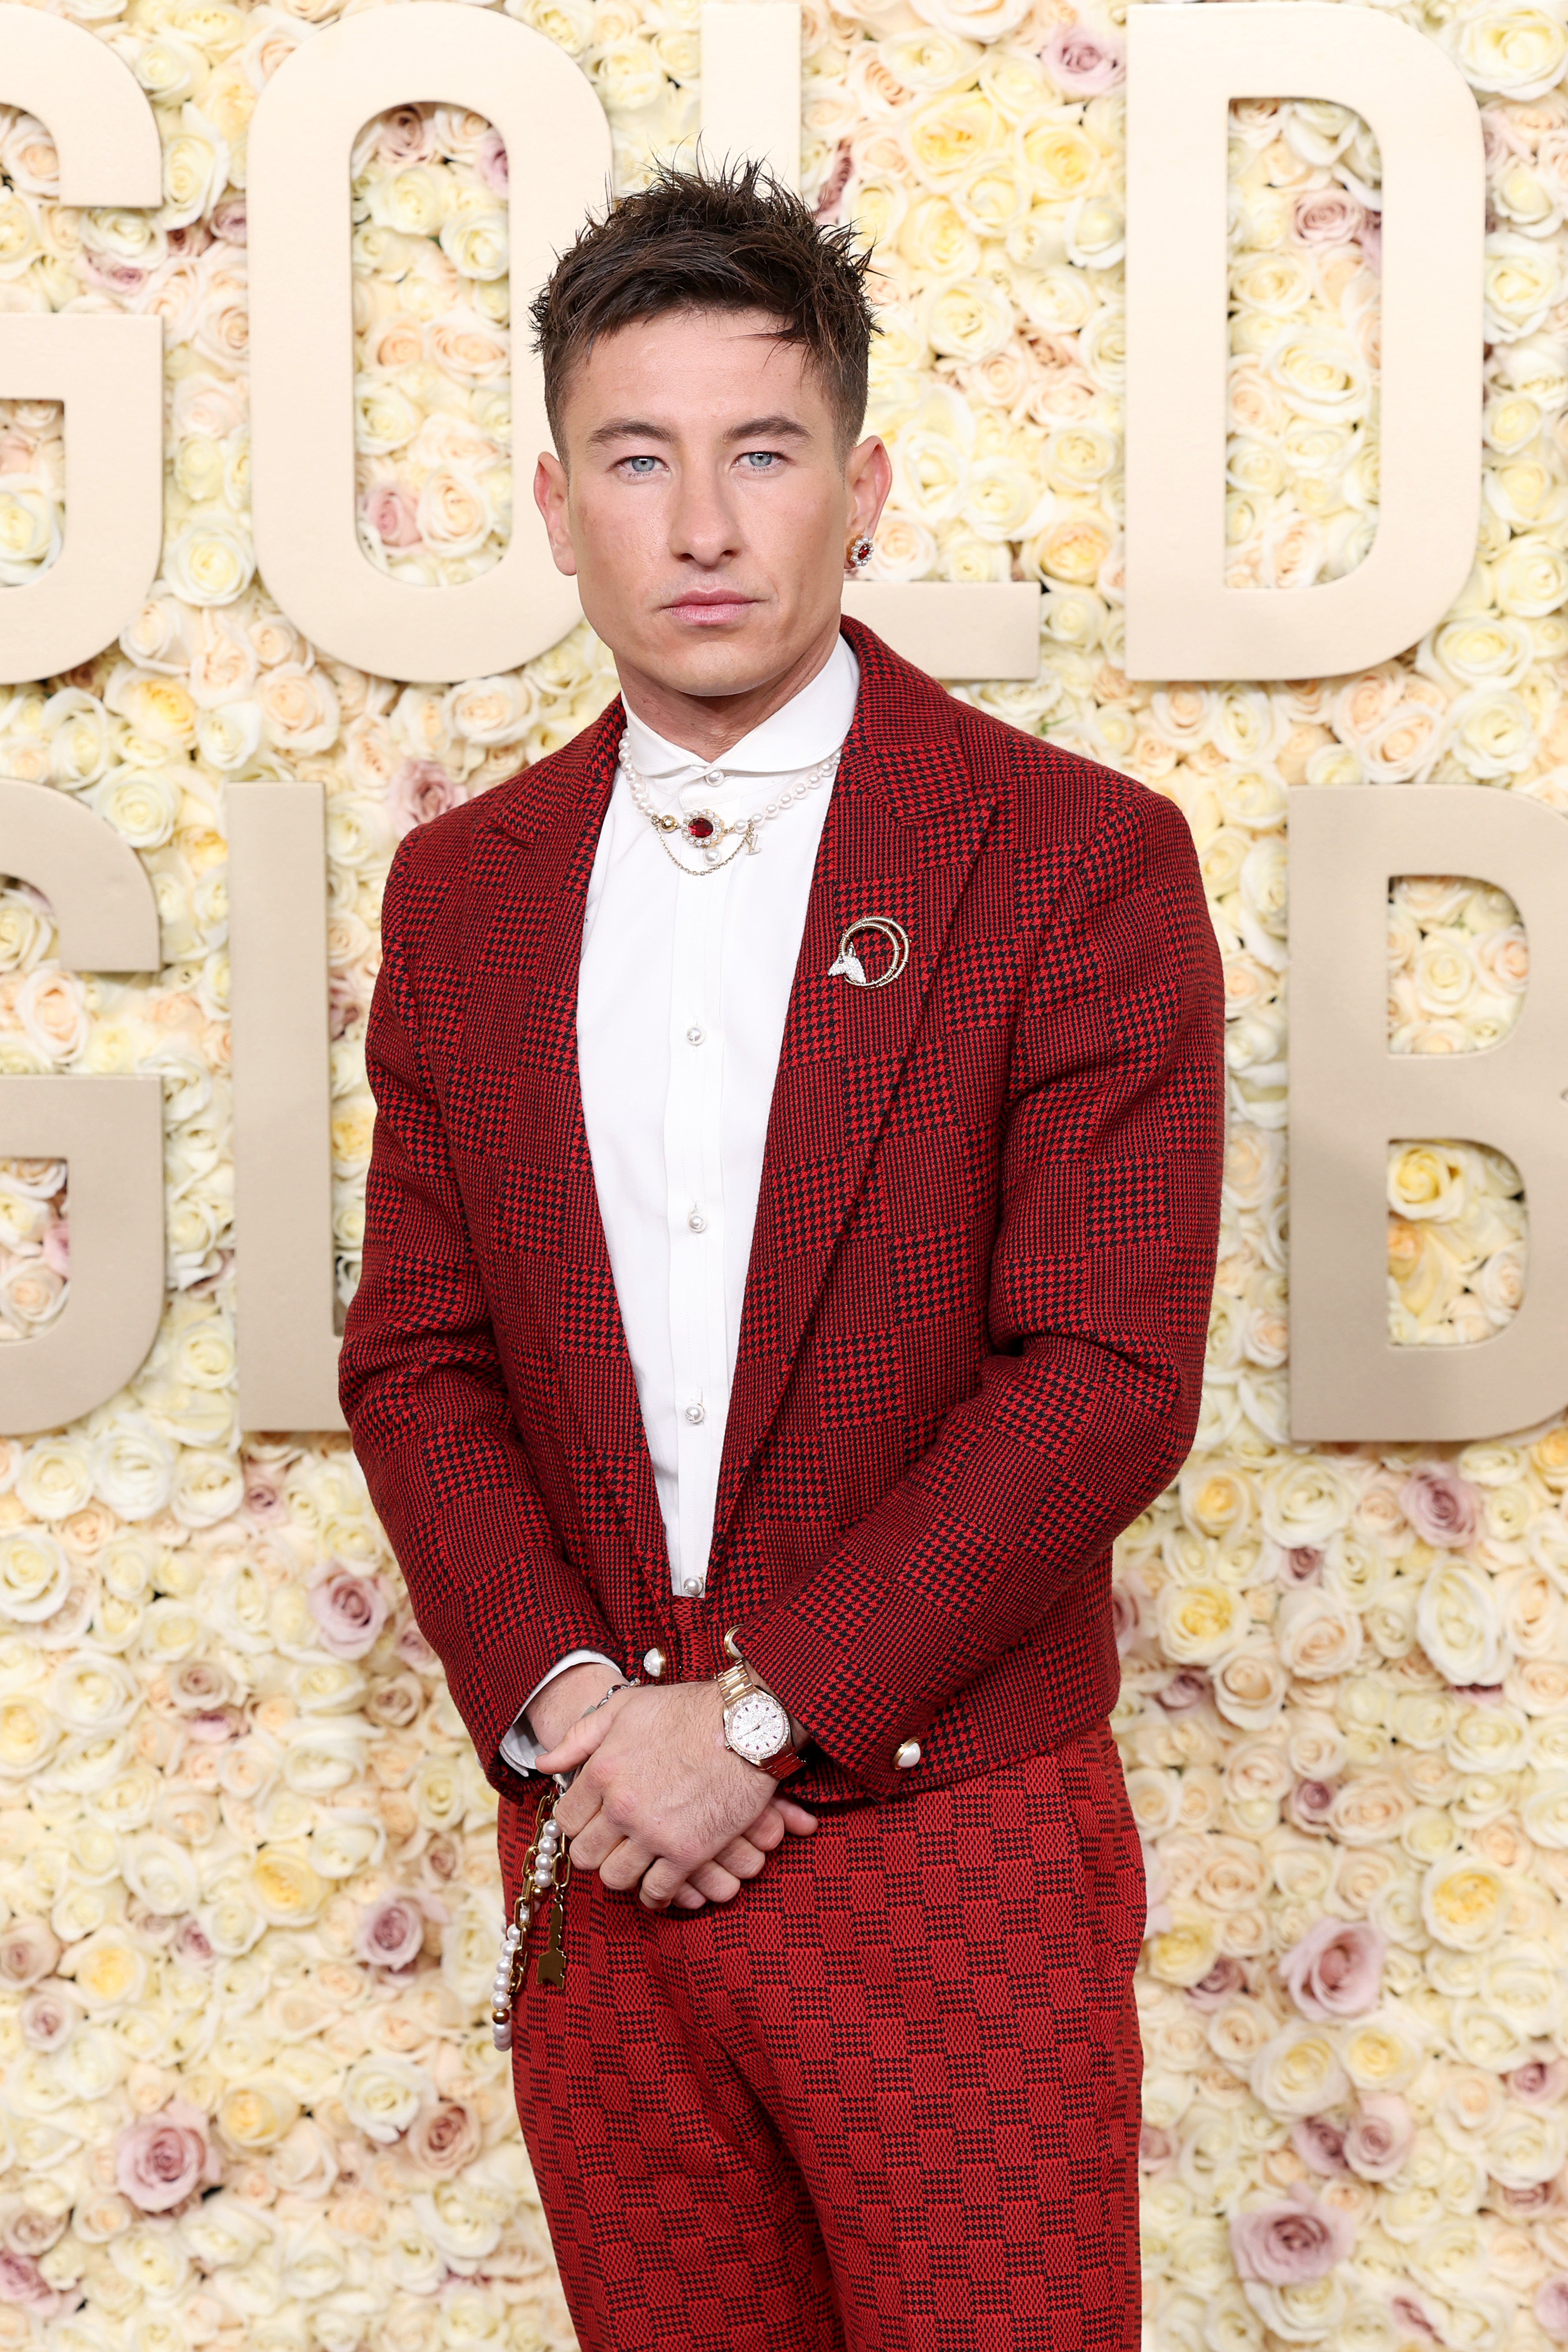 Man in a patterned red suit with hands clasped in front of a flower wall with gold letters